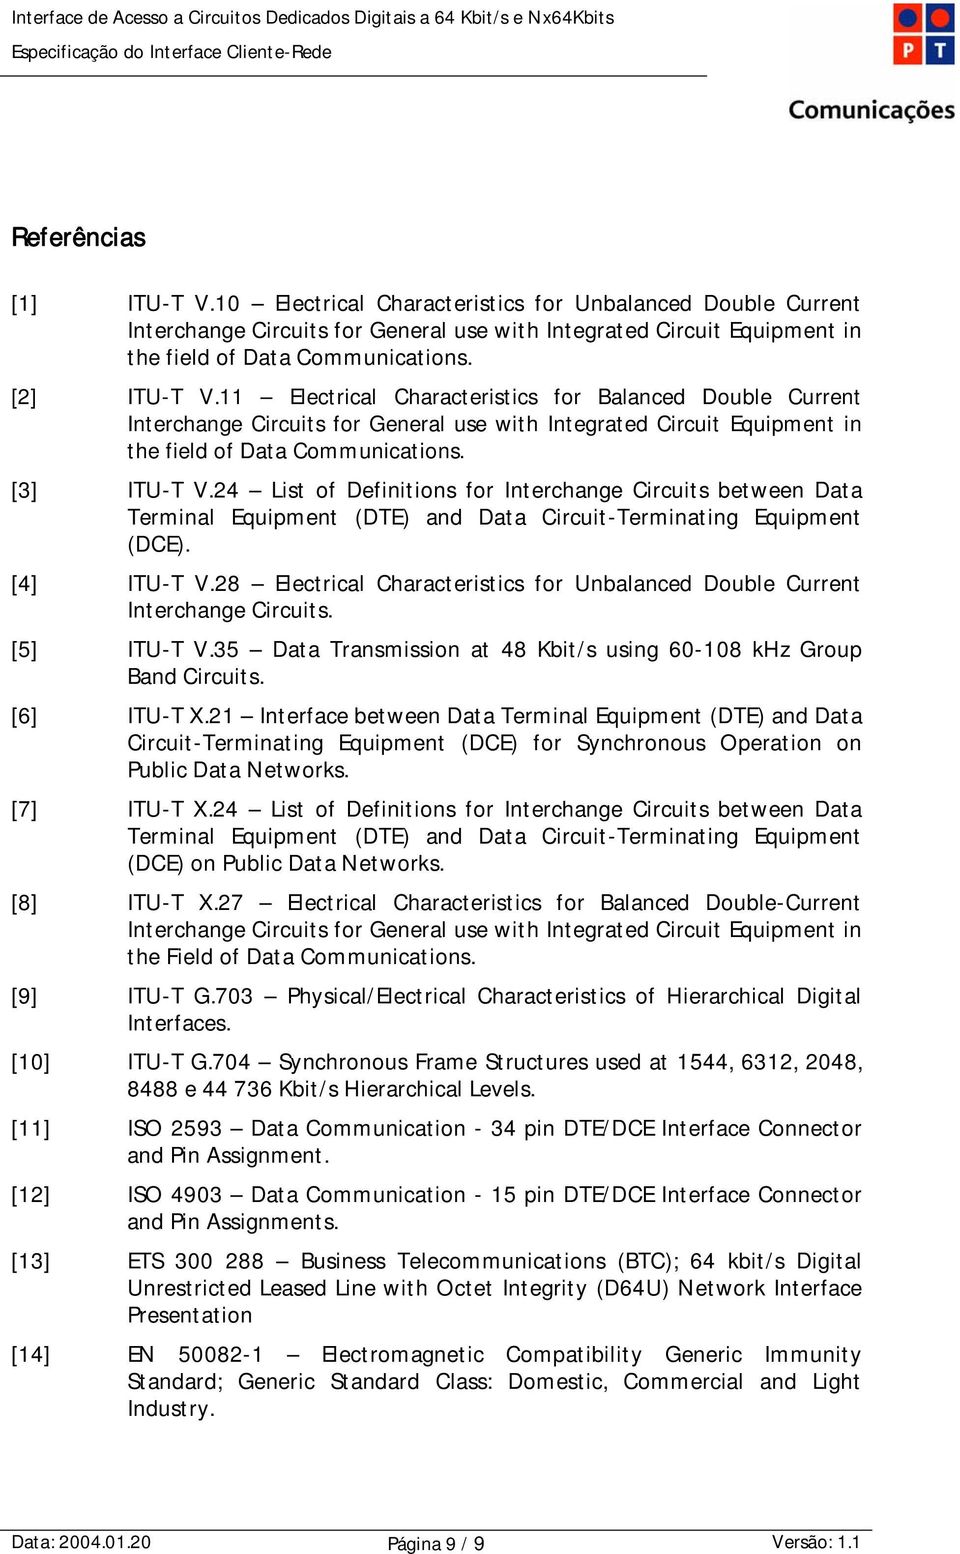 24 List of Definitions for Interchange Circuits between Data Terminal Equipment (DTE) and Data Circuit-Terminating Equipment (DCE). [4] ITU-T V.